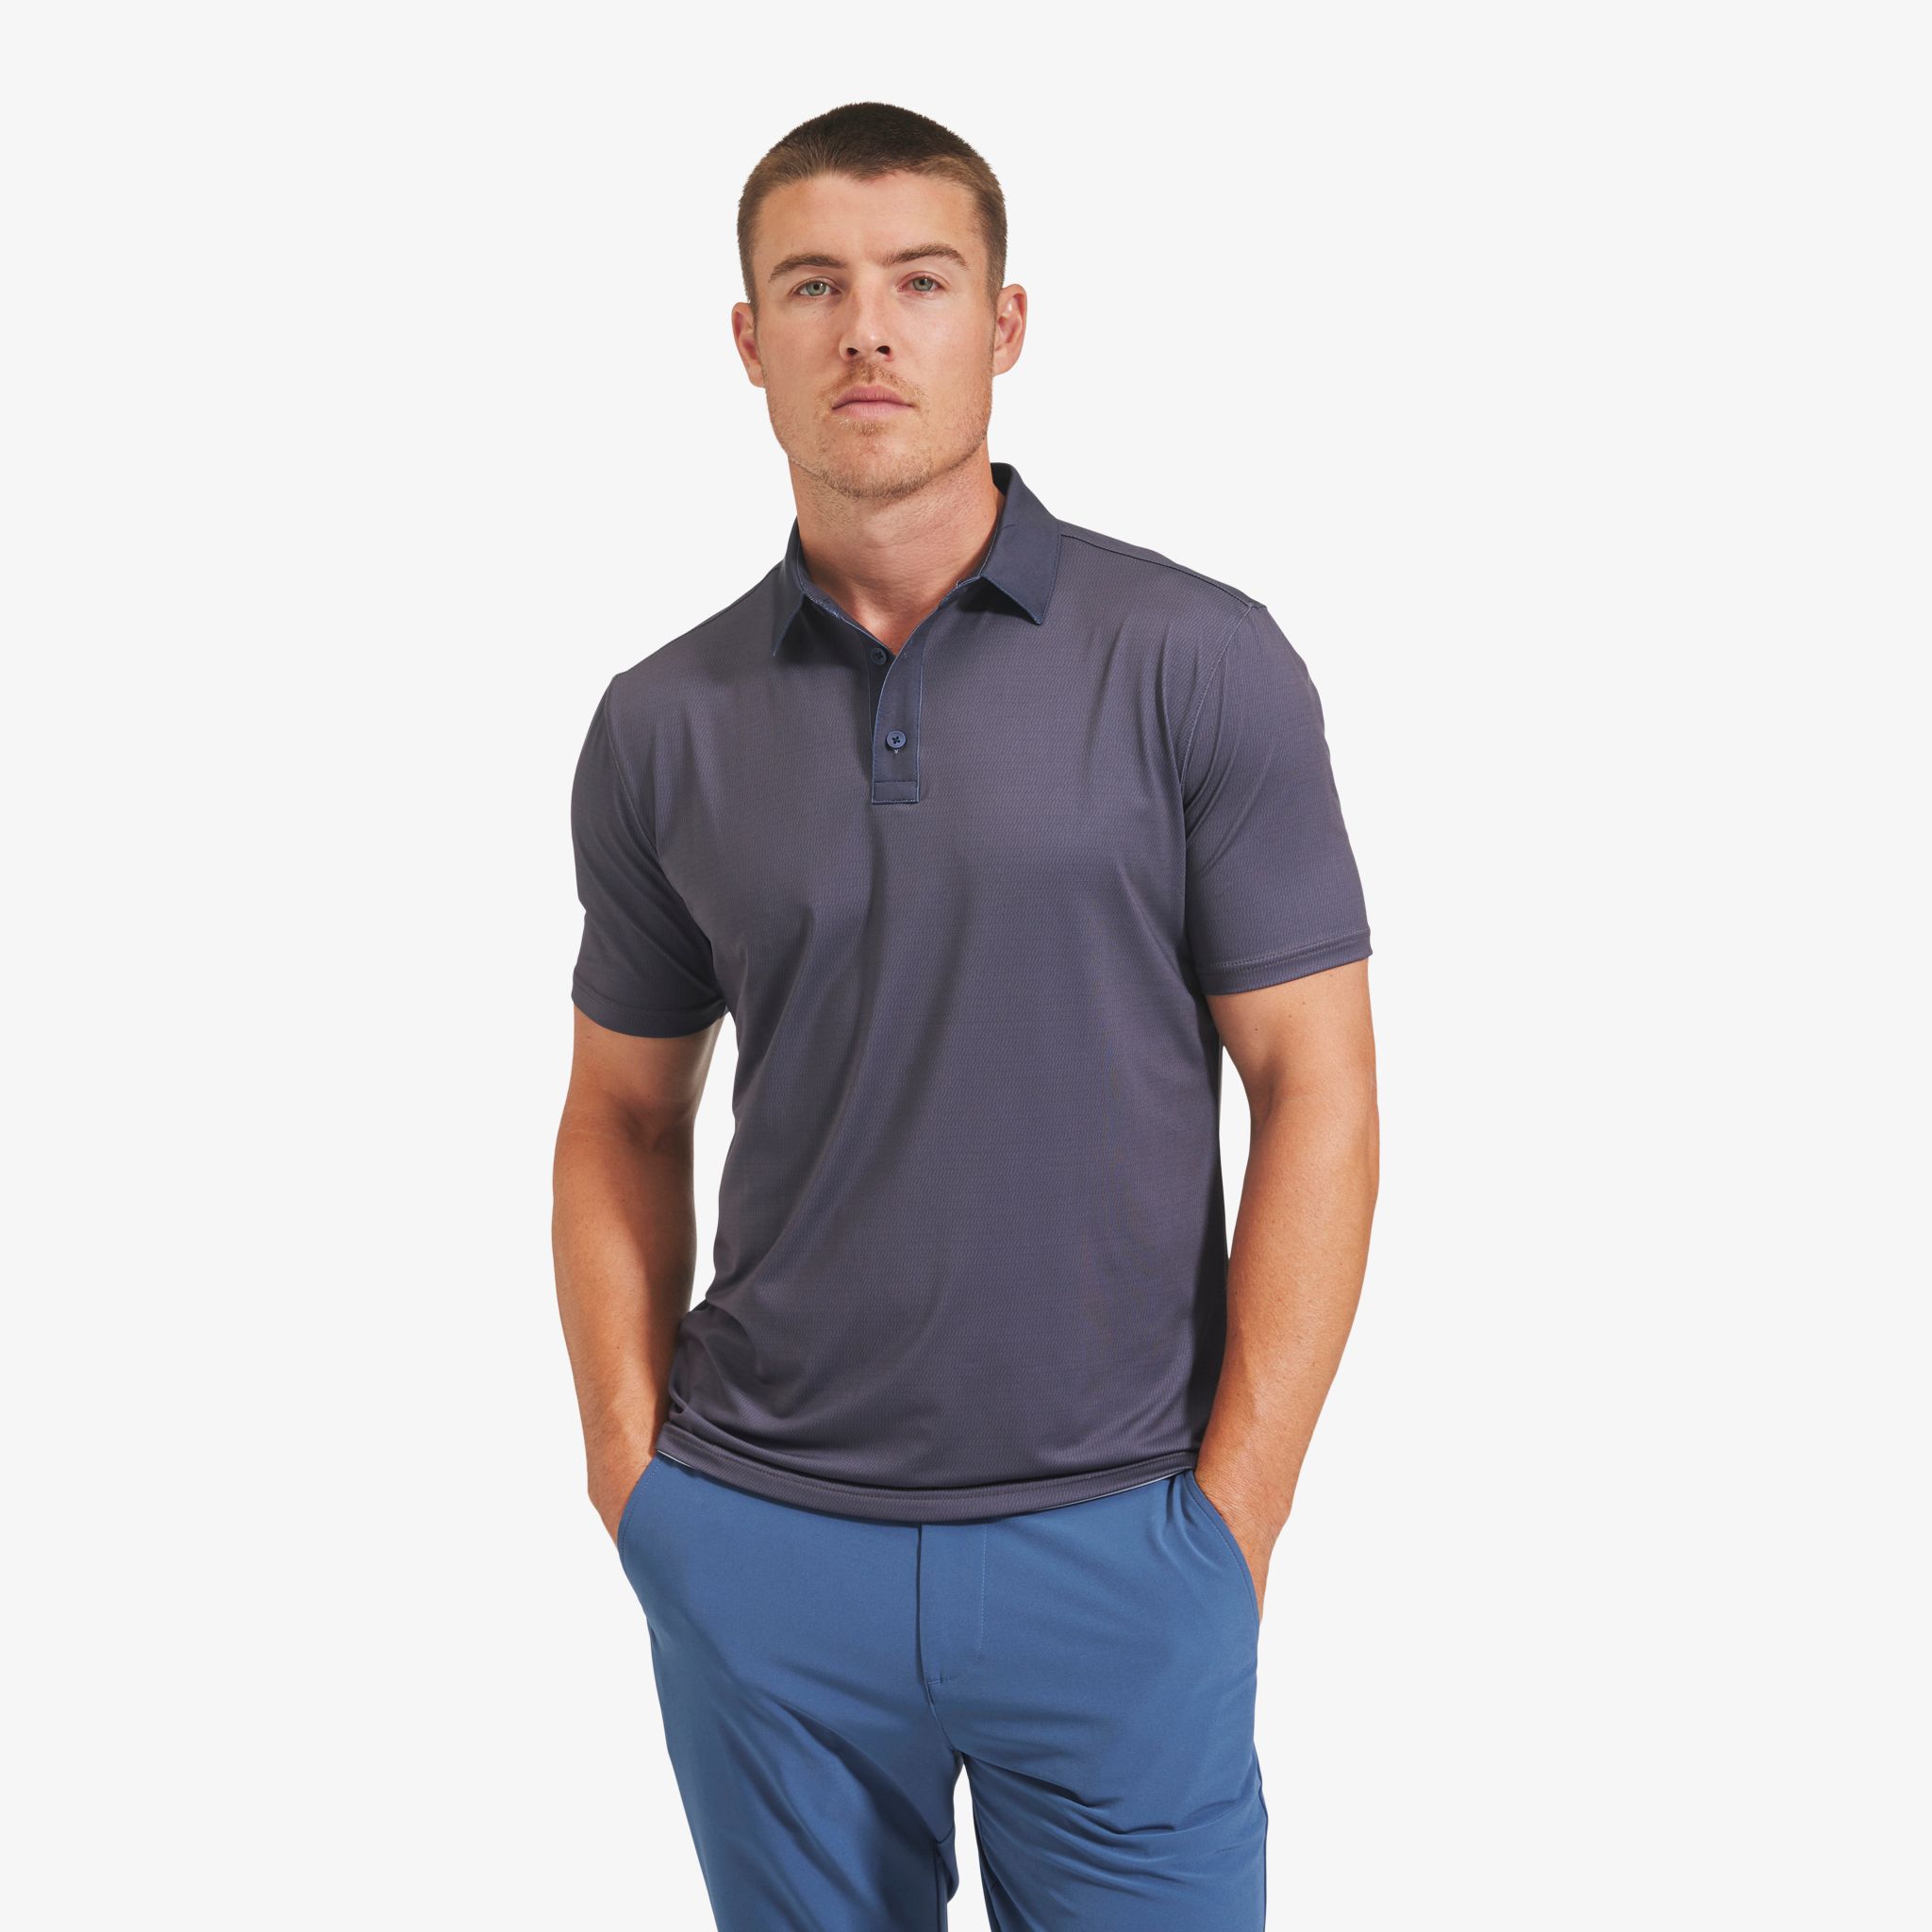 Versa Polo - Charcoal Texture Print with Contrast